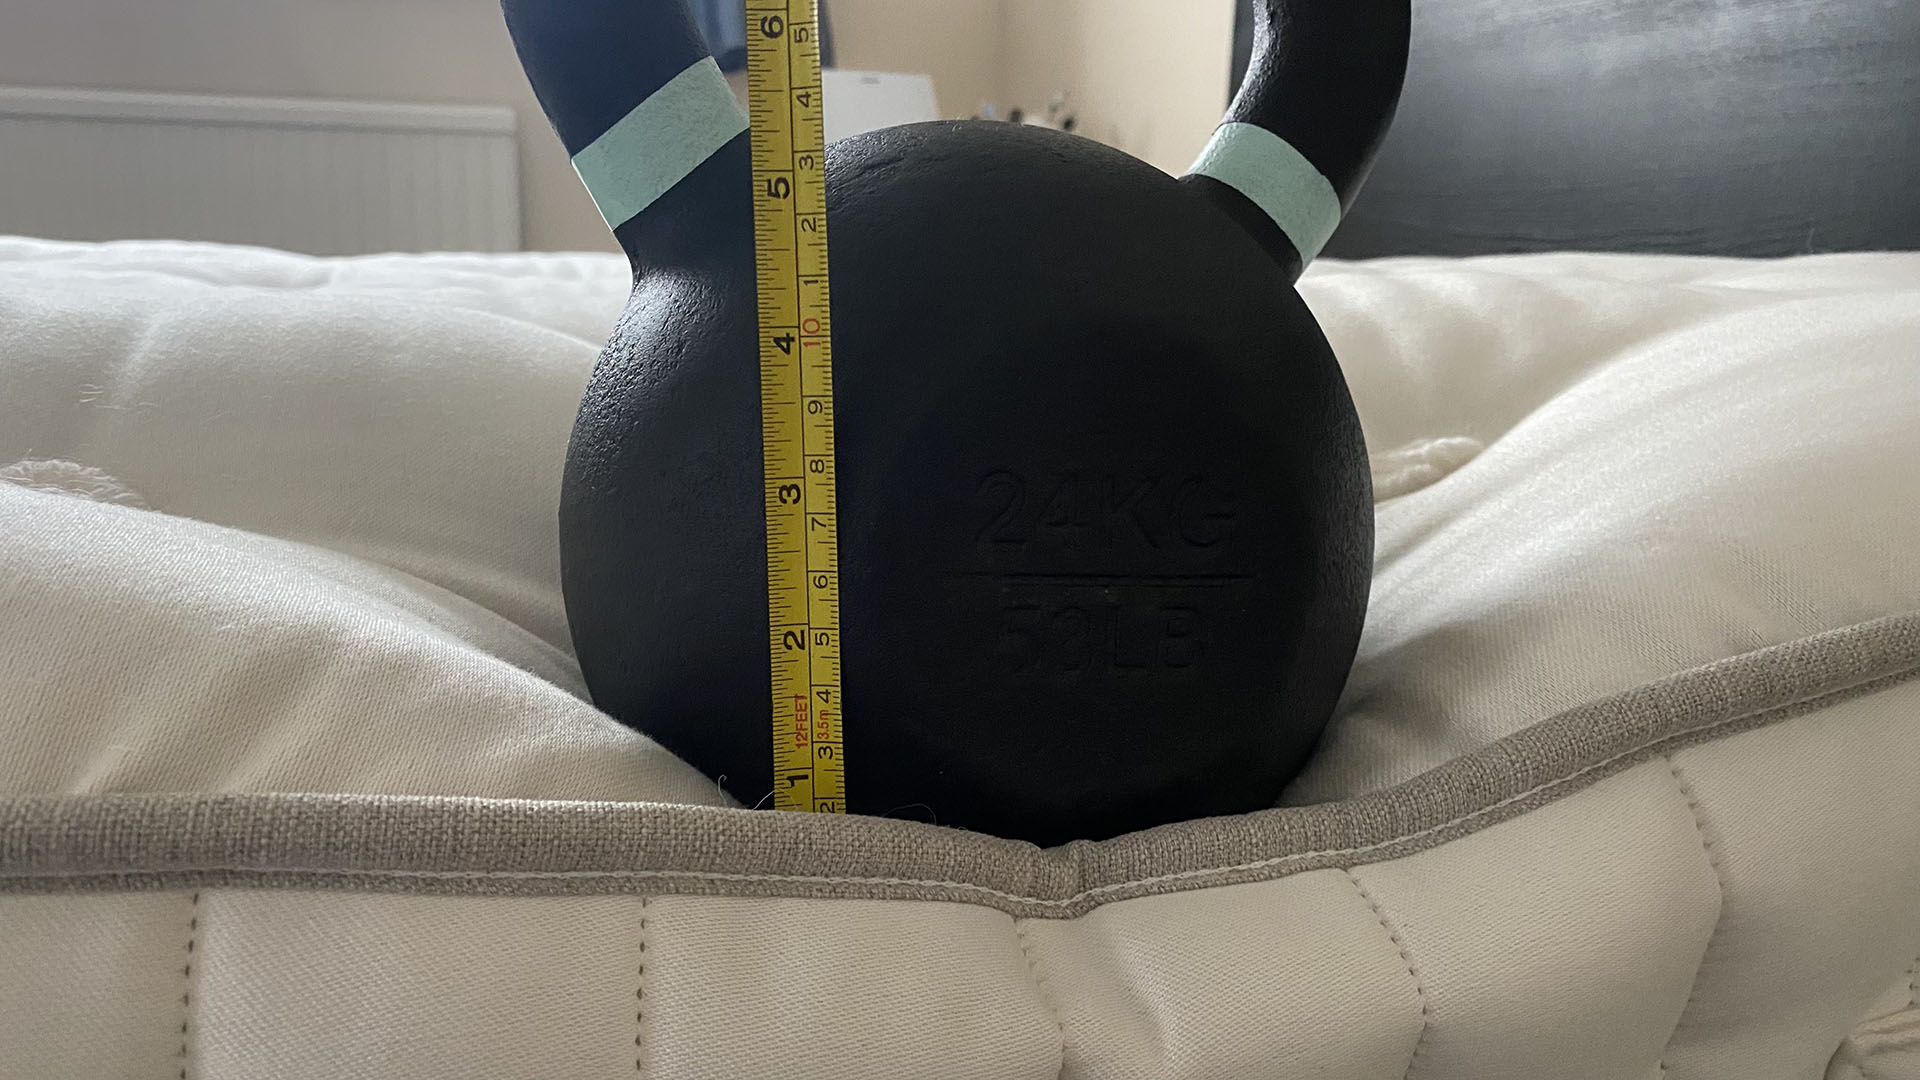 A 24kg kettlebell sitting on the edge of the Simba Earth Escape mattress, with a tape measure showing how much the mattress sinks